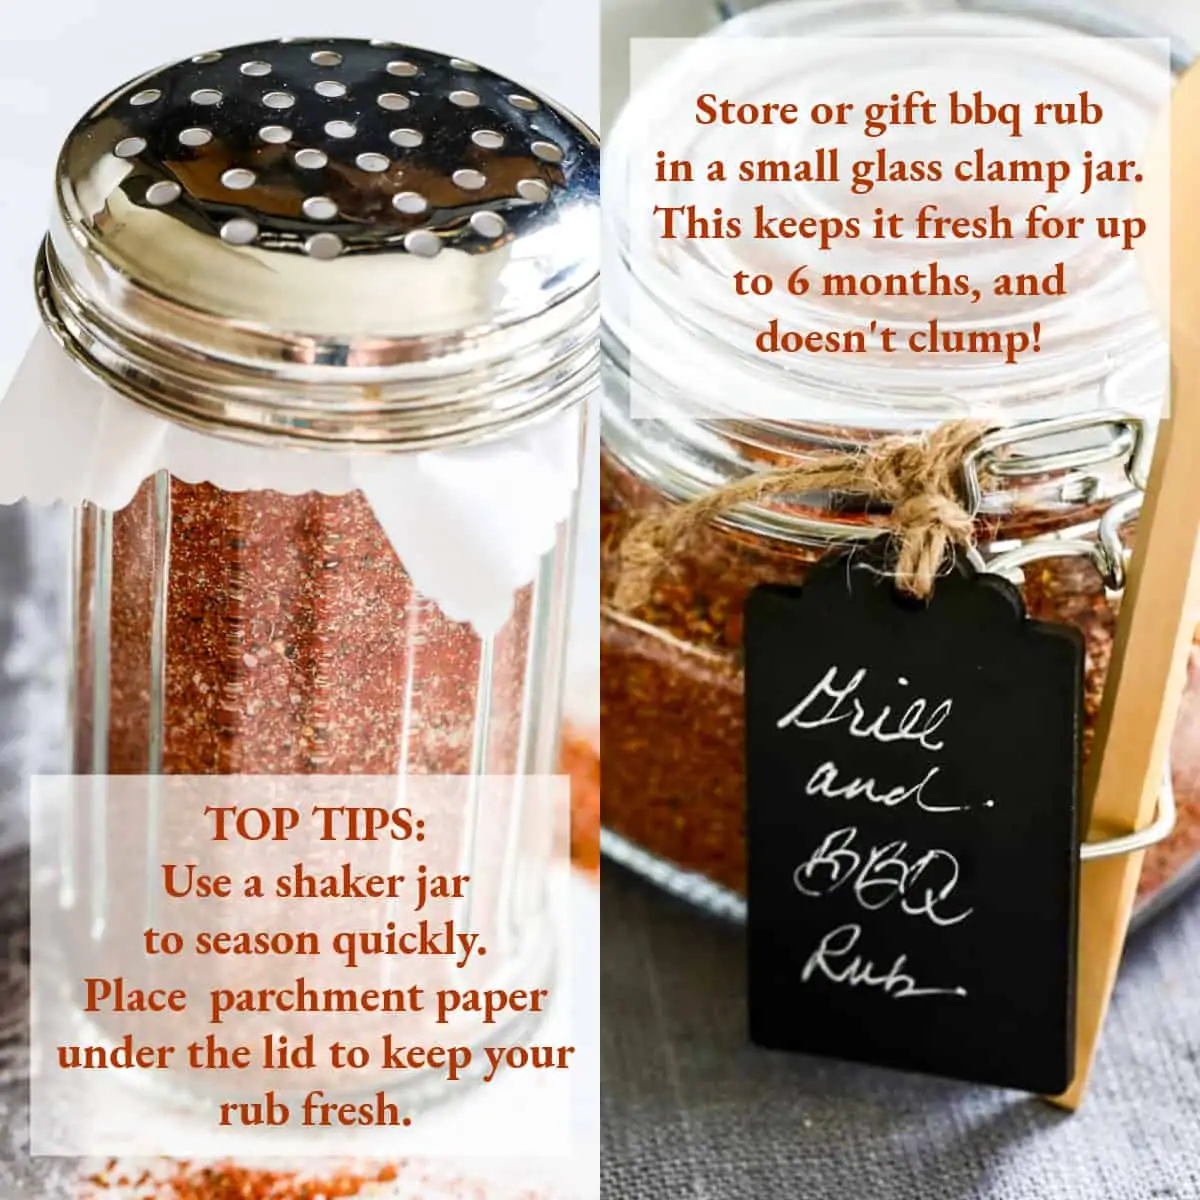 A graphic showing how to put dry rub in a shaker jar or clamp jar to use in cooking.